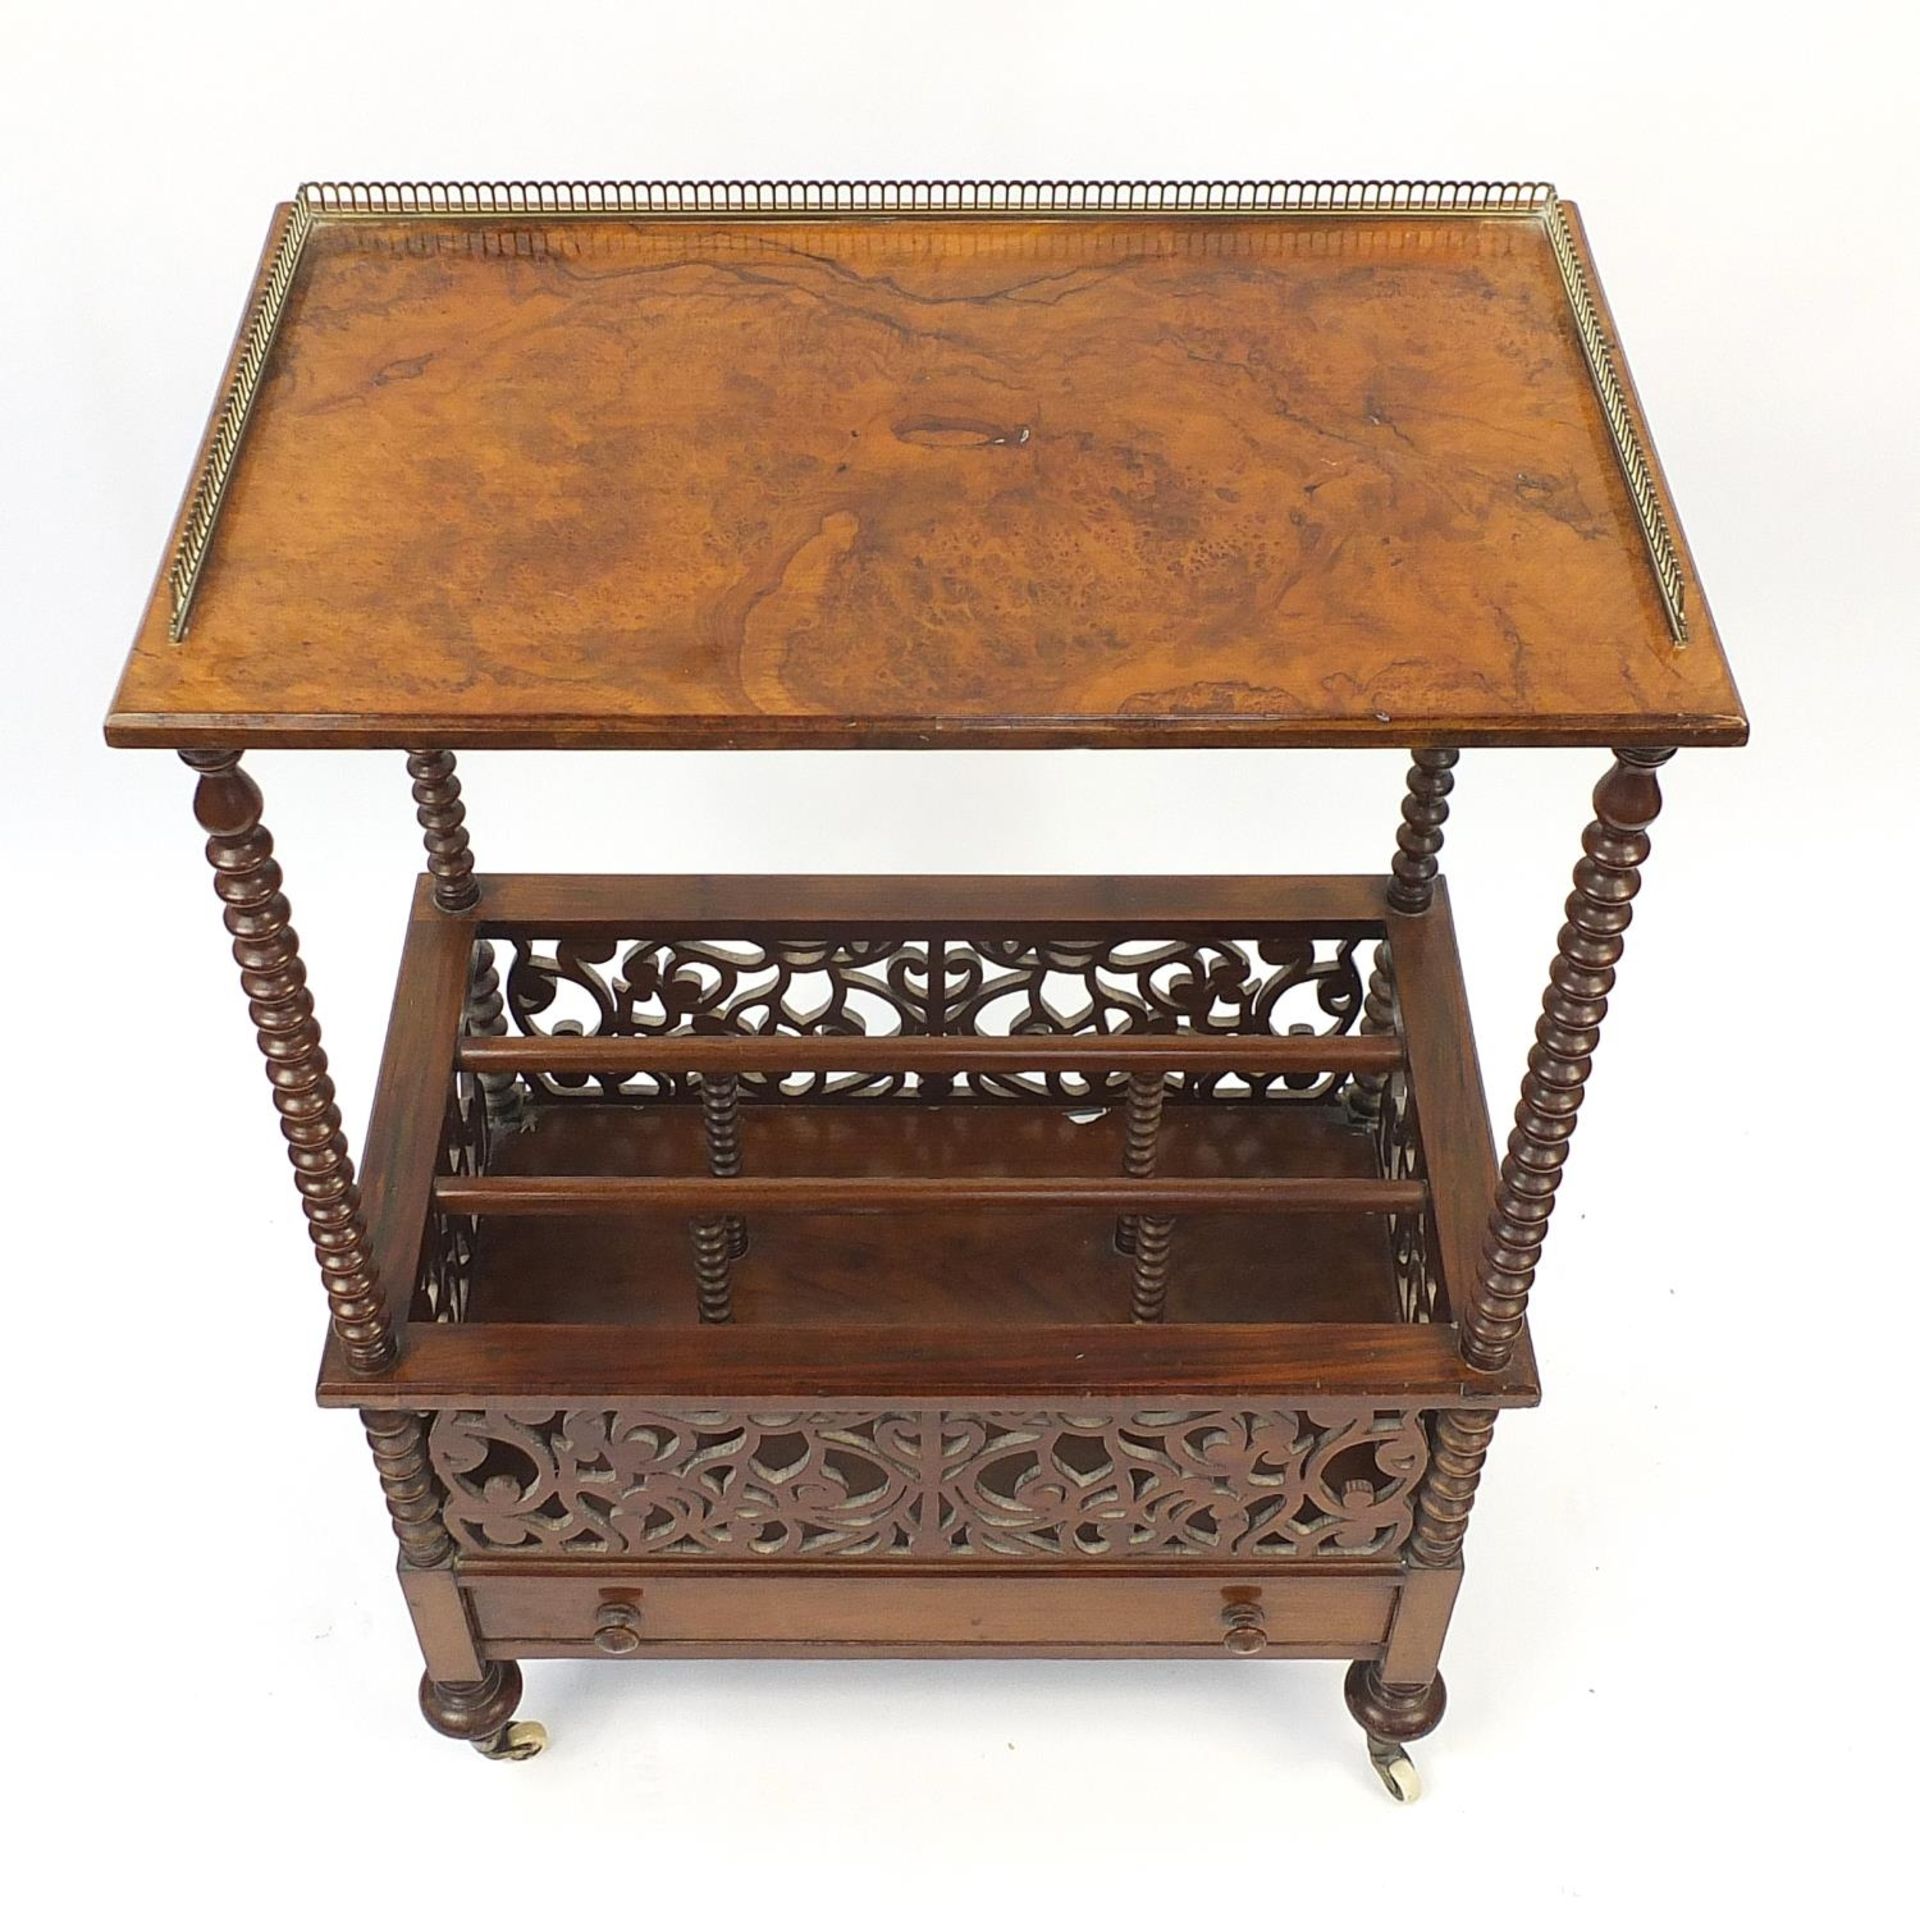 Victorian burr walnut Canterbury with brass gallery and drawer to the base, 100cm H x 67cm W x - Image 3 of 5